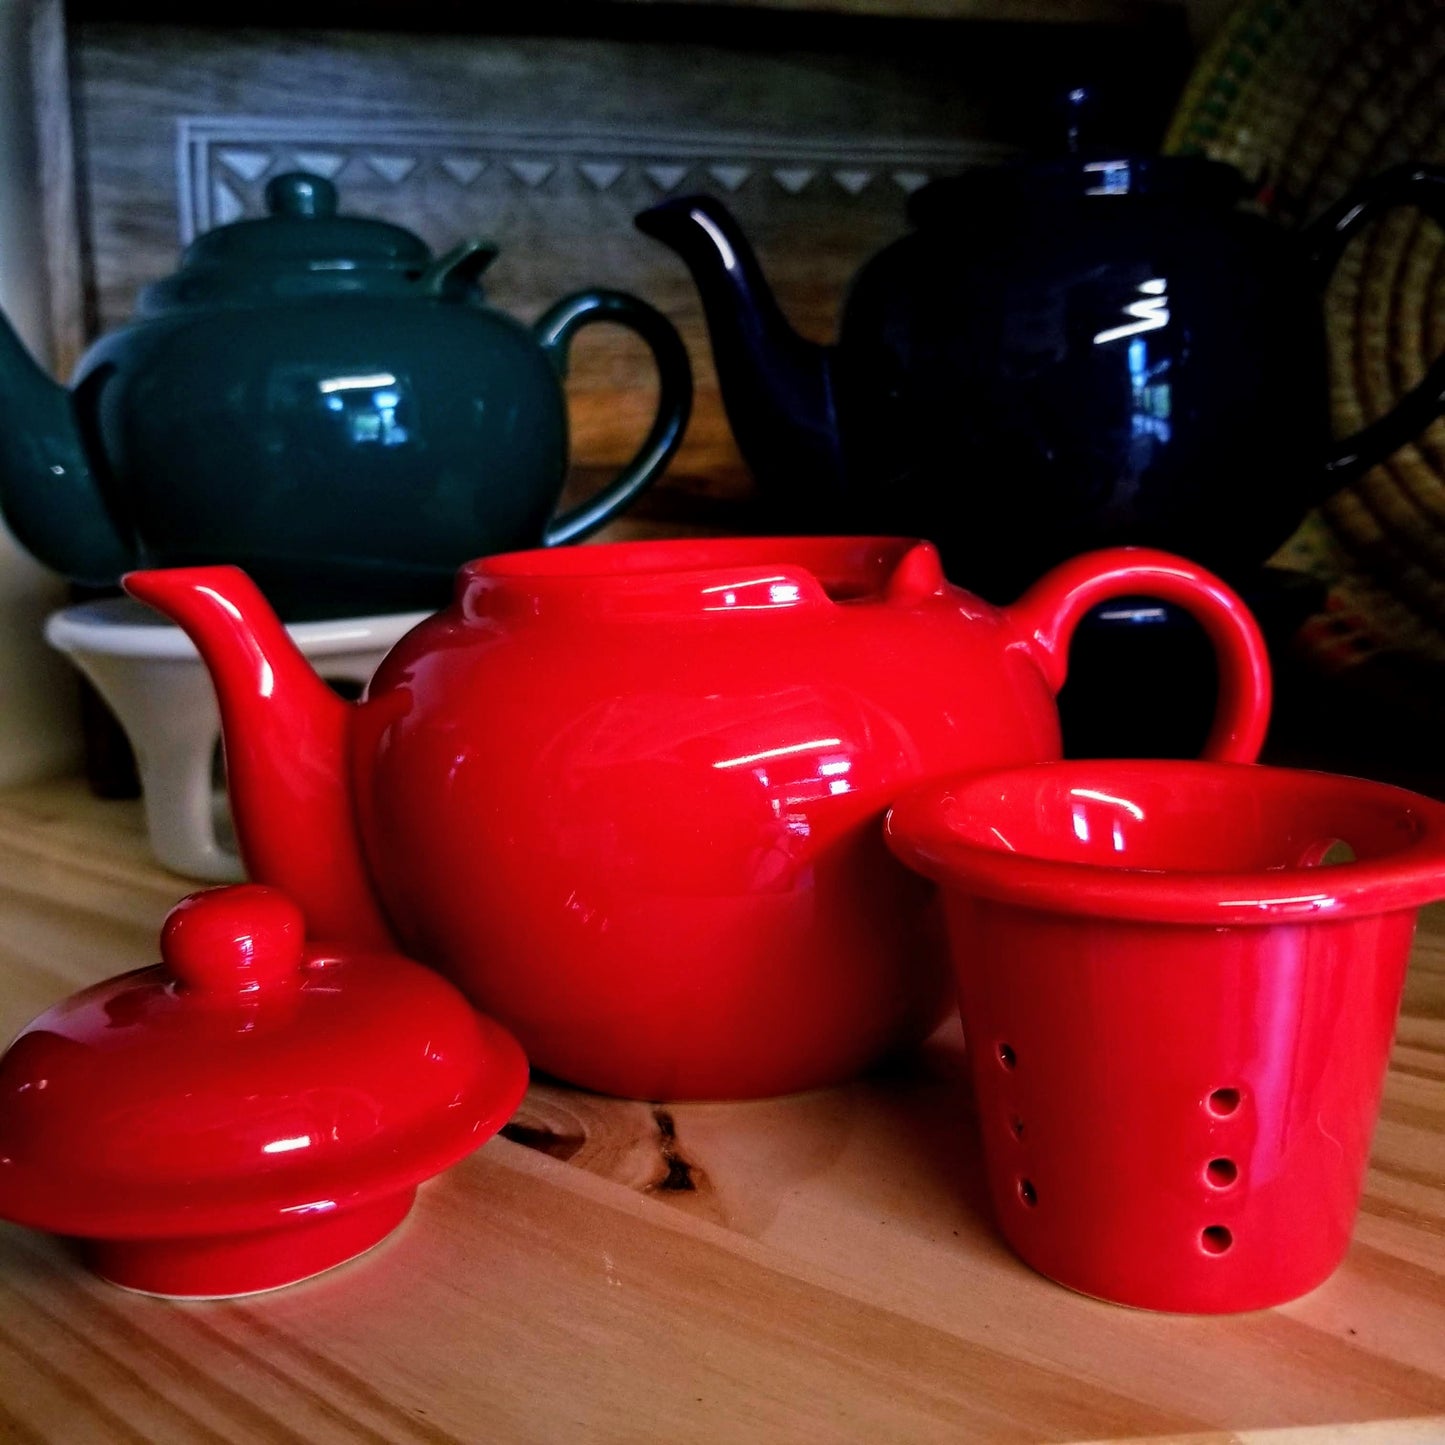 Teapot with Ceramic Infuser